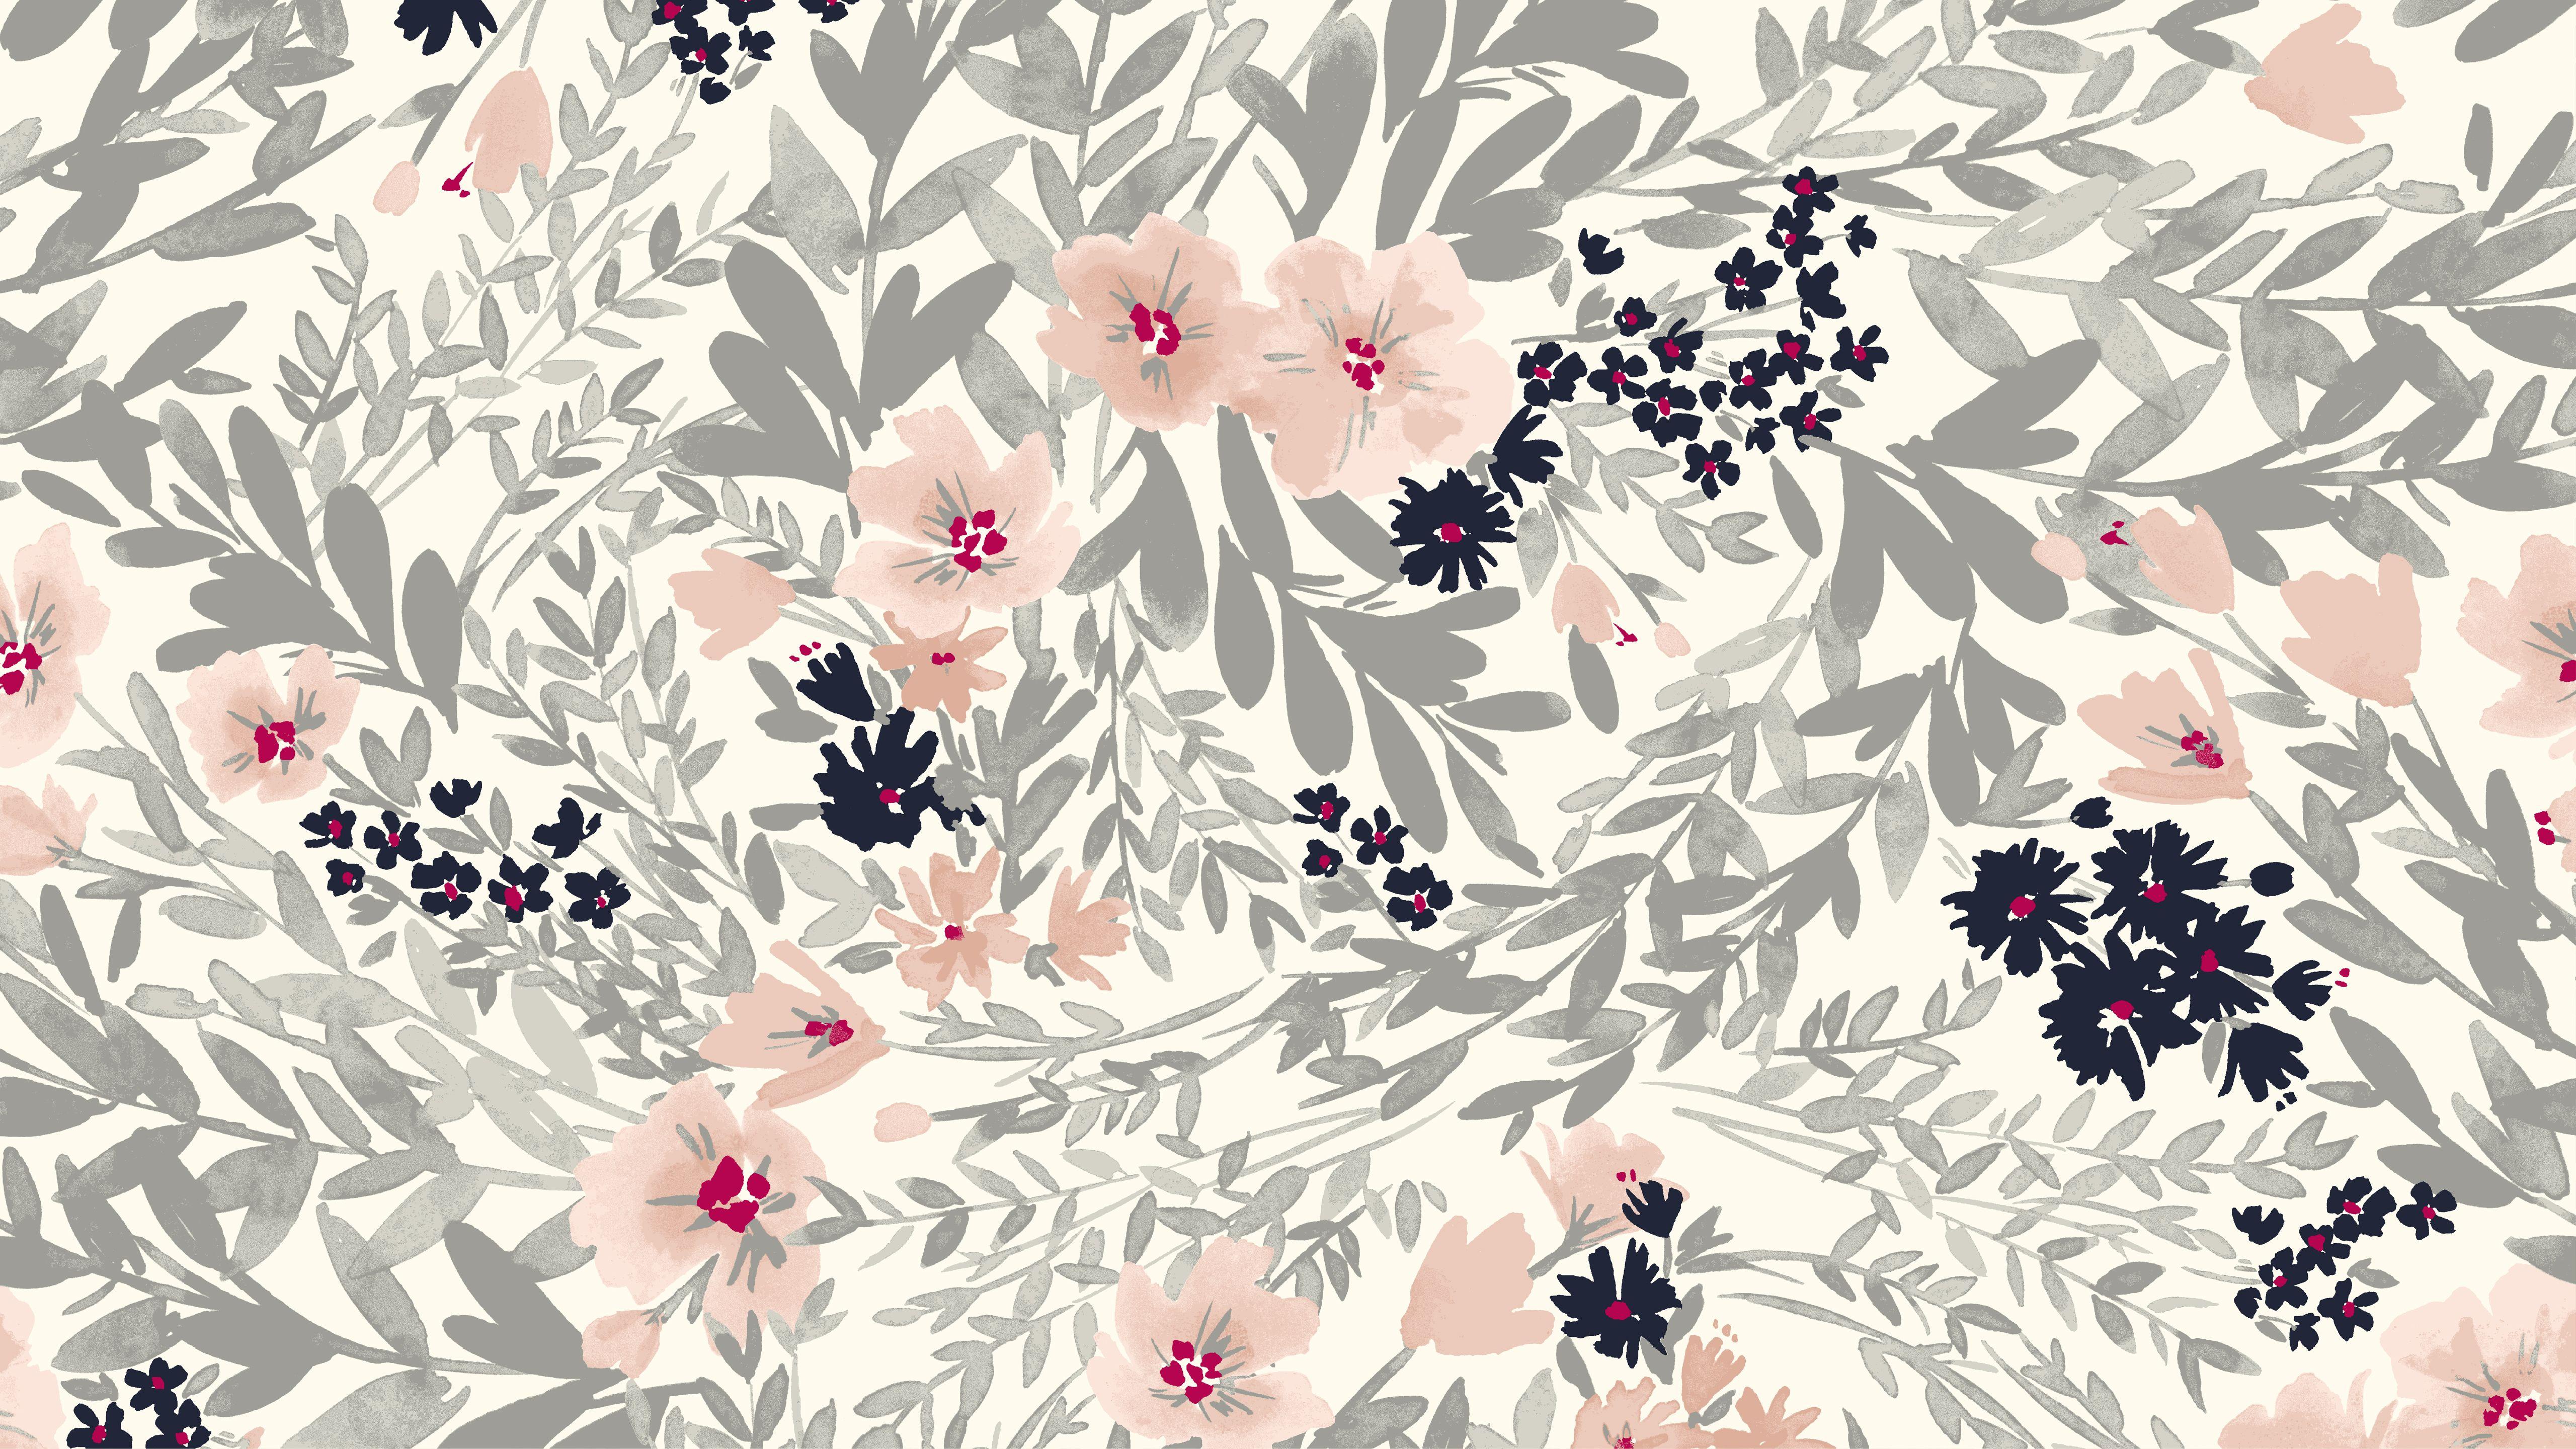 Floral Background Wallpaper Watercolor 5120x2880